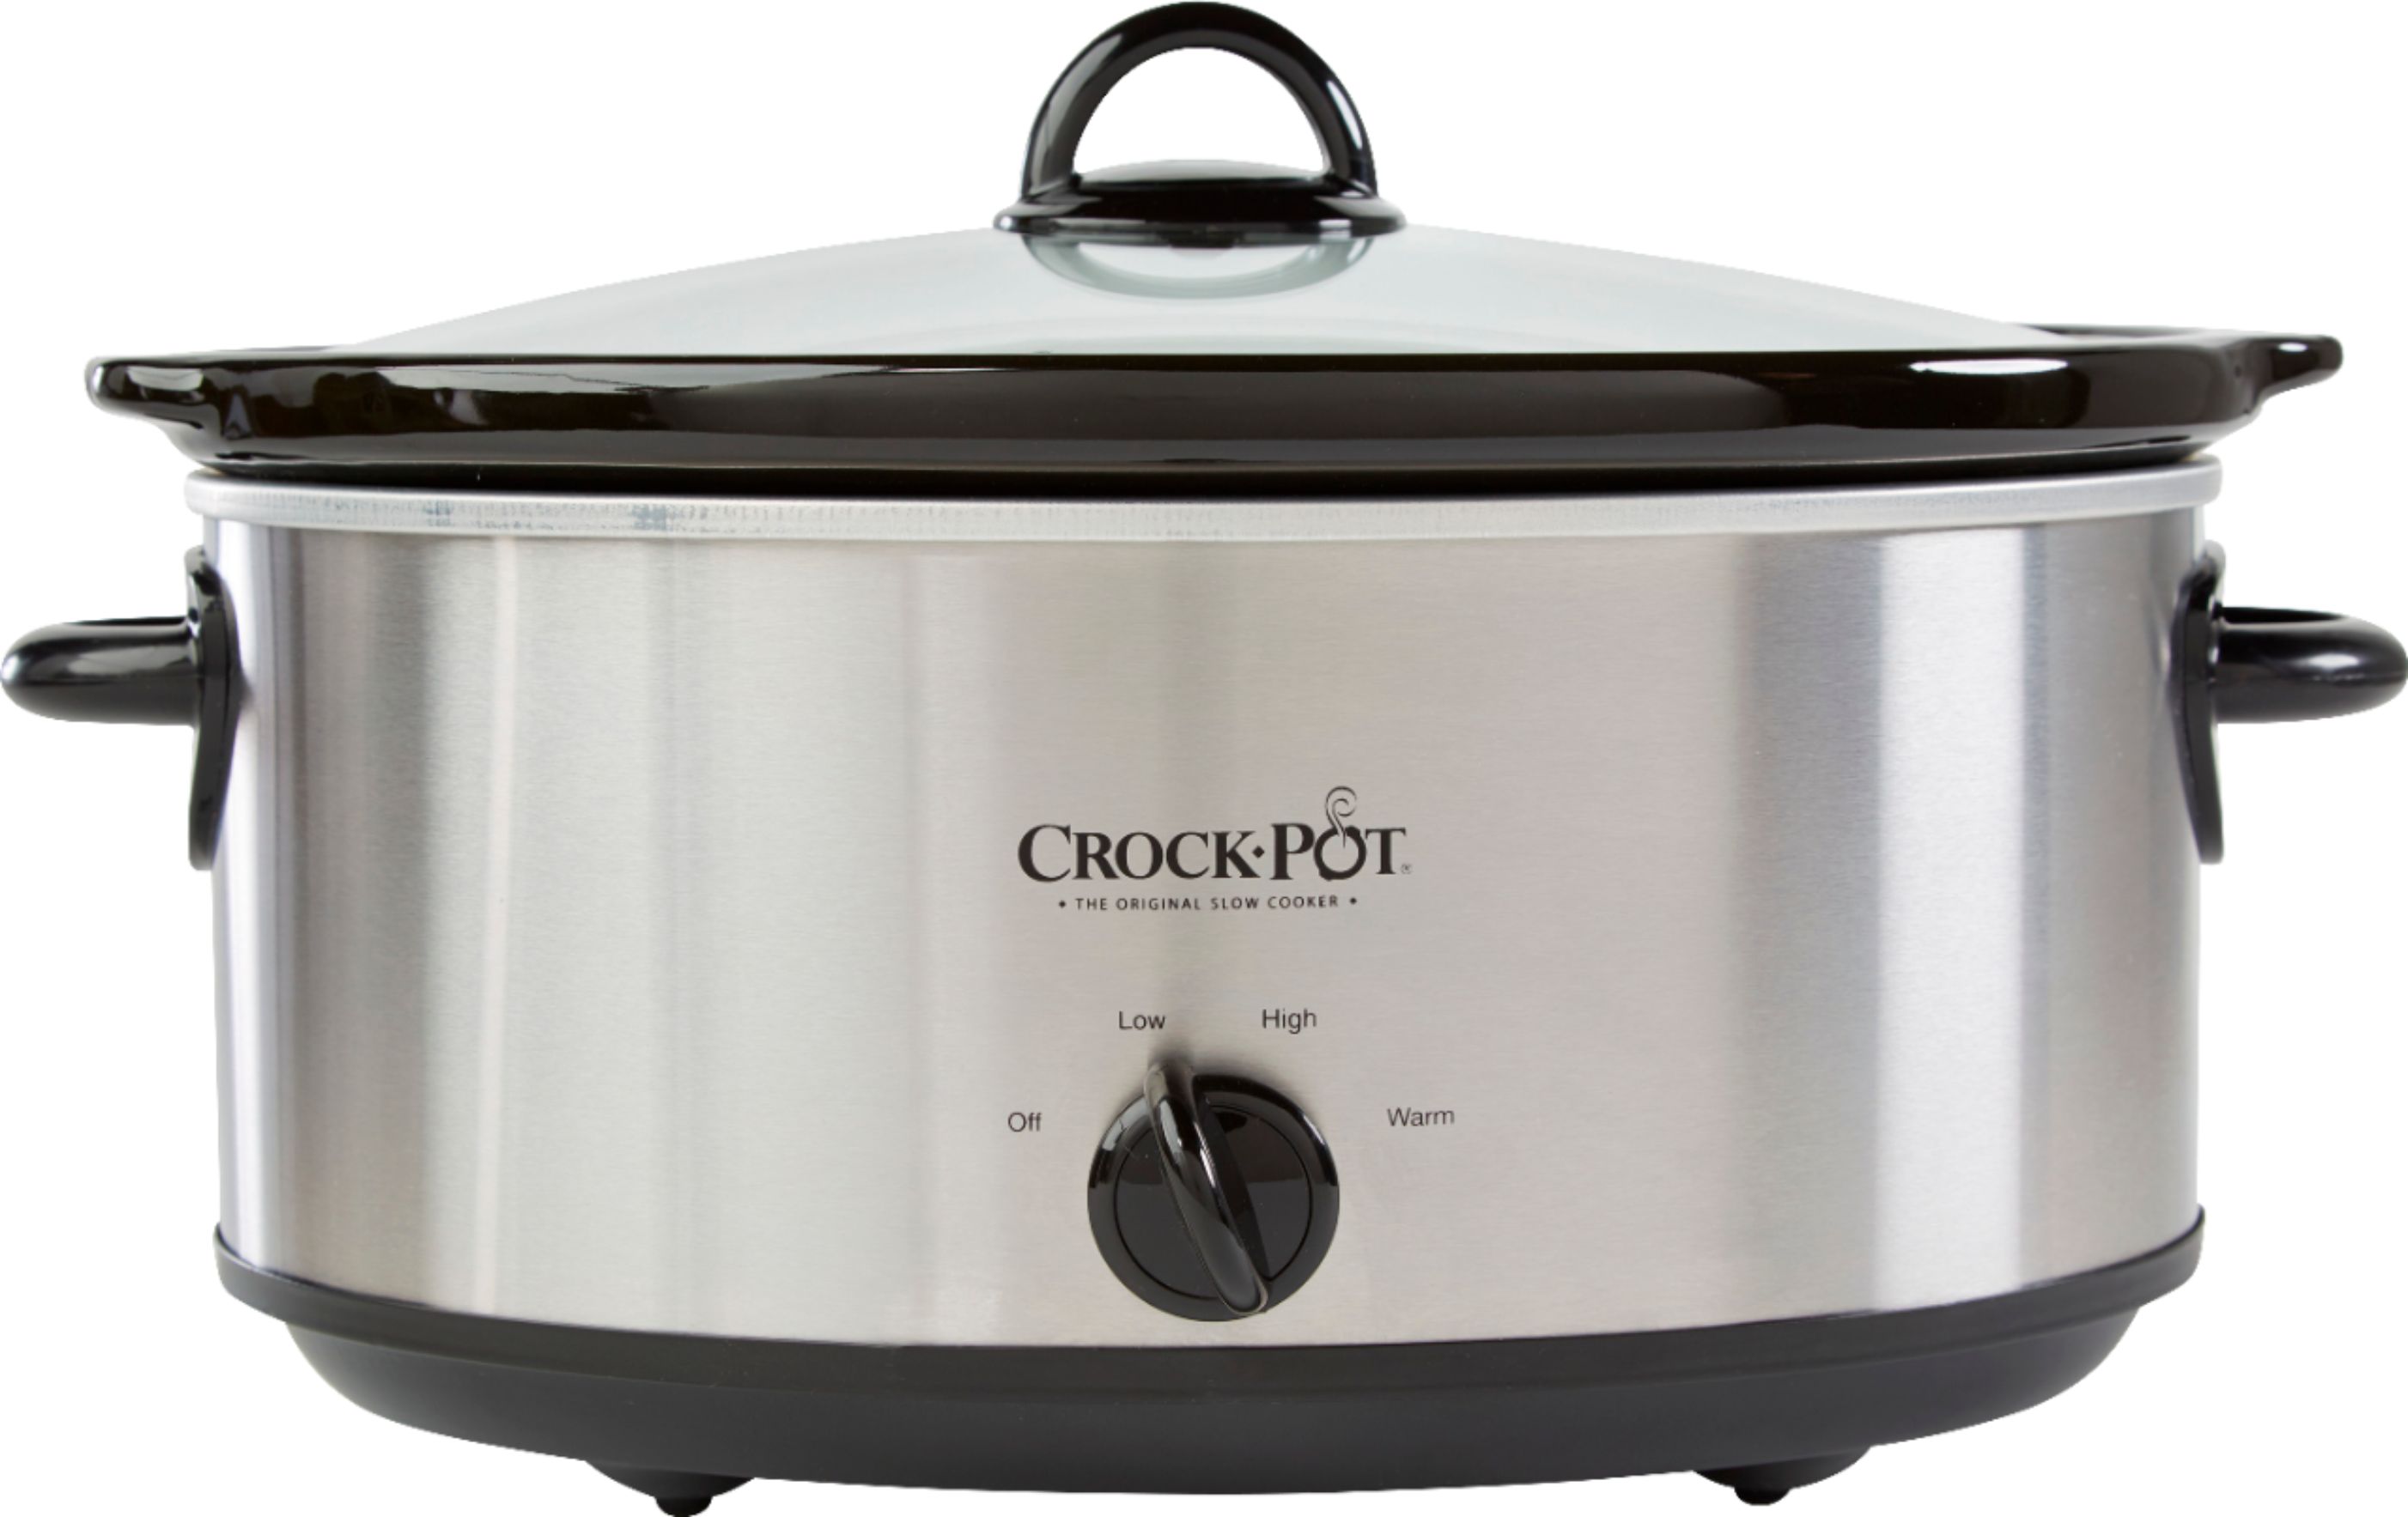 Stainless Steel Crock-Pot SCV700-SS Oval Manual Slow Cooker 